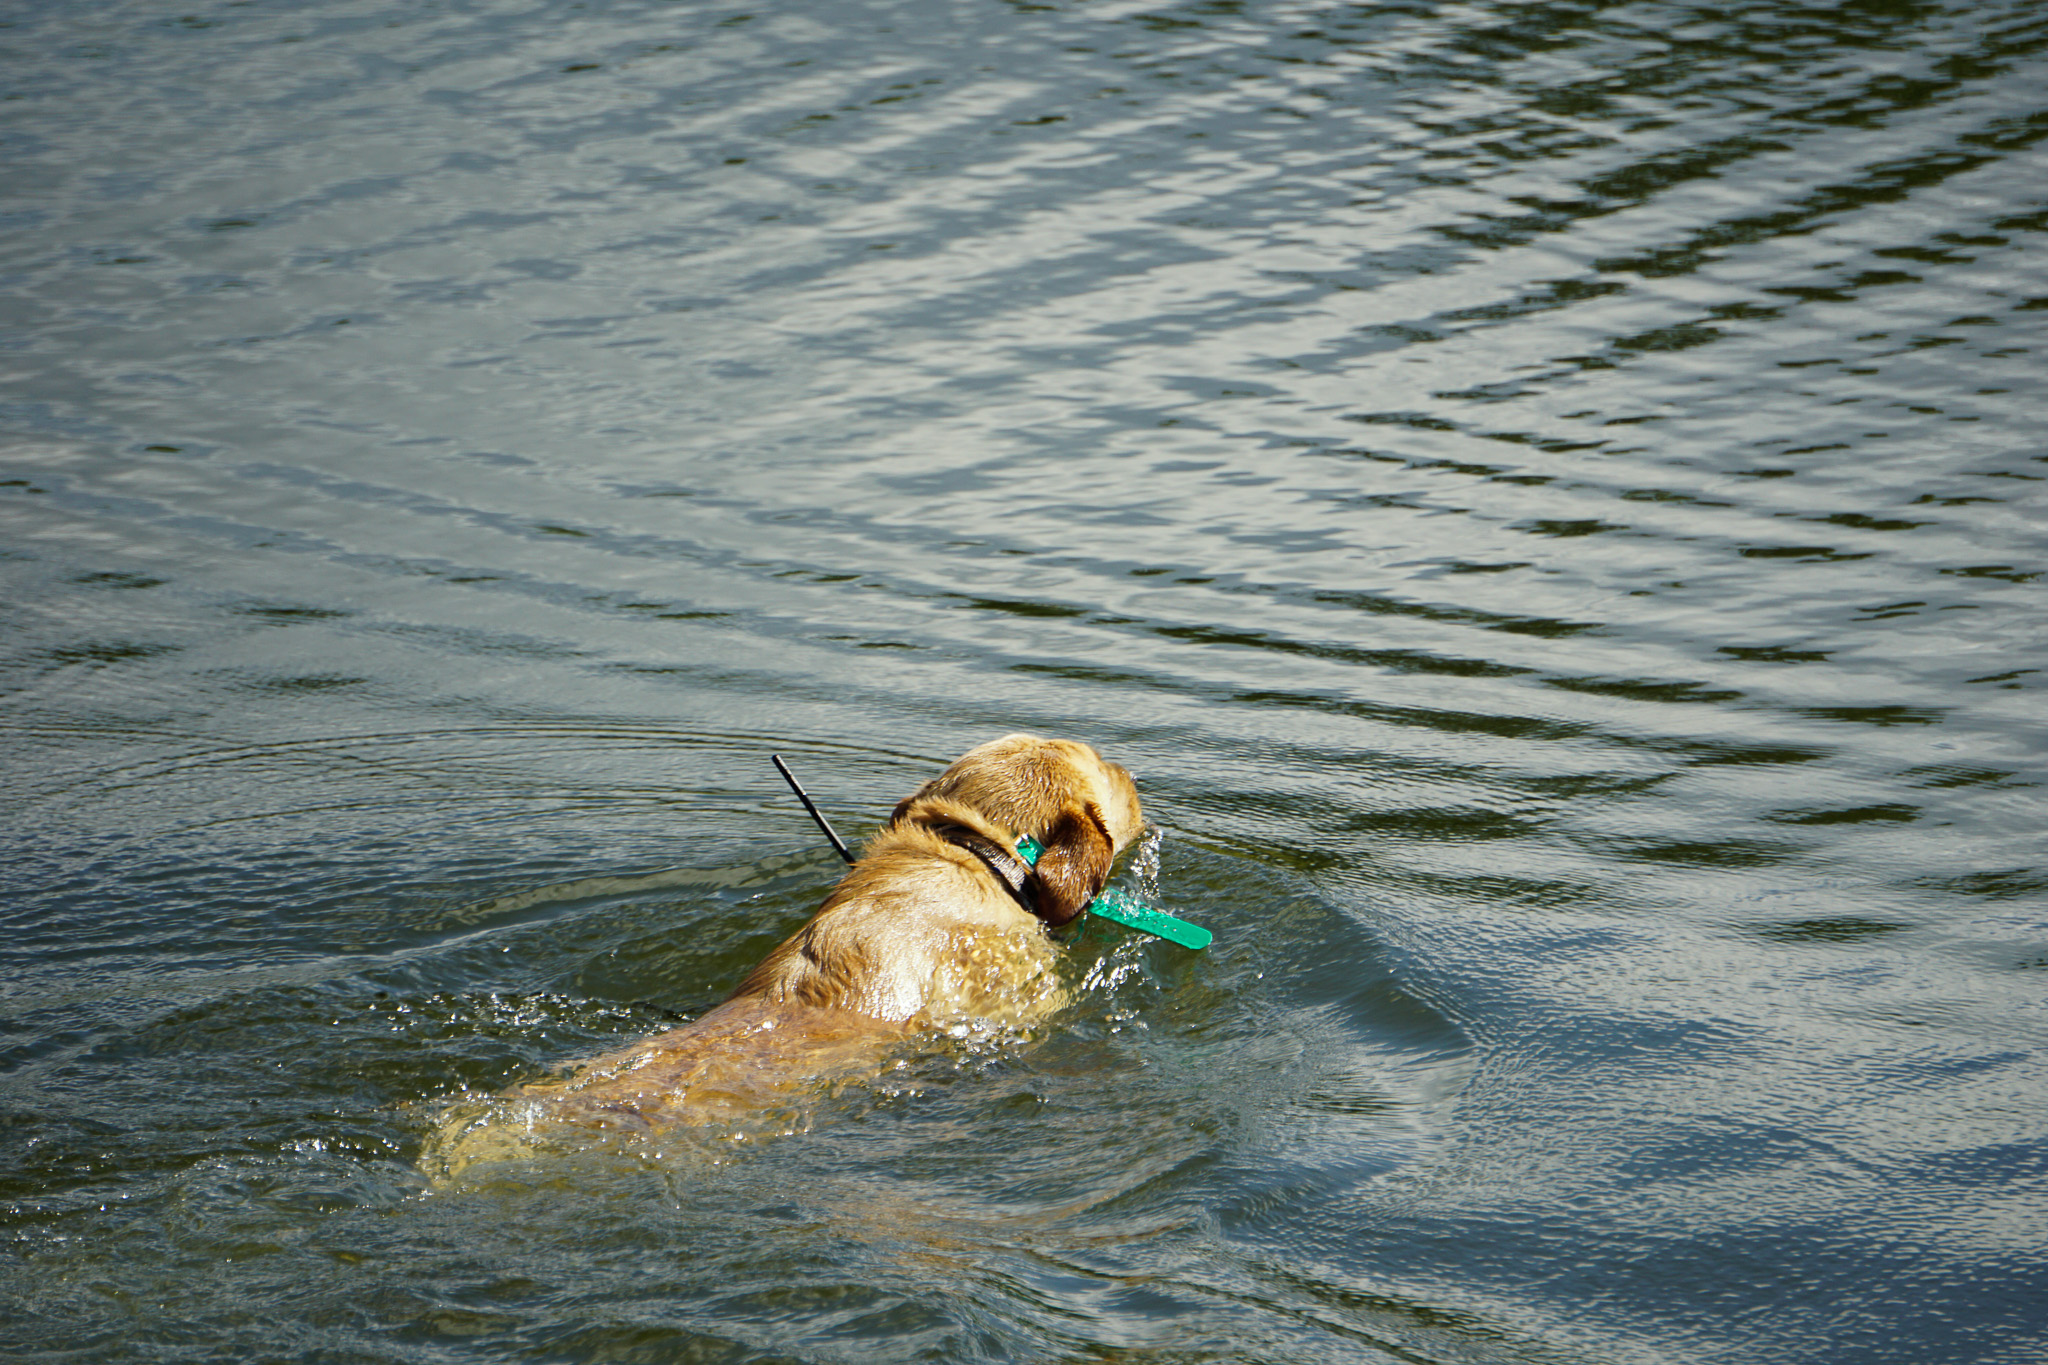 Testing gps dog collars in the water.